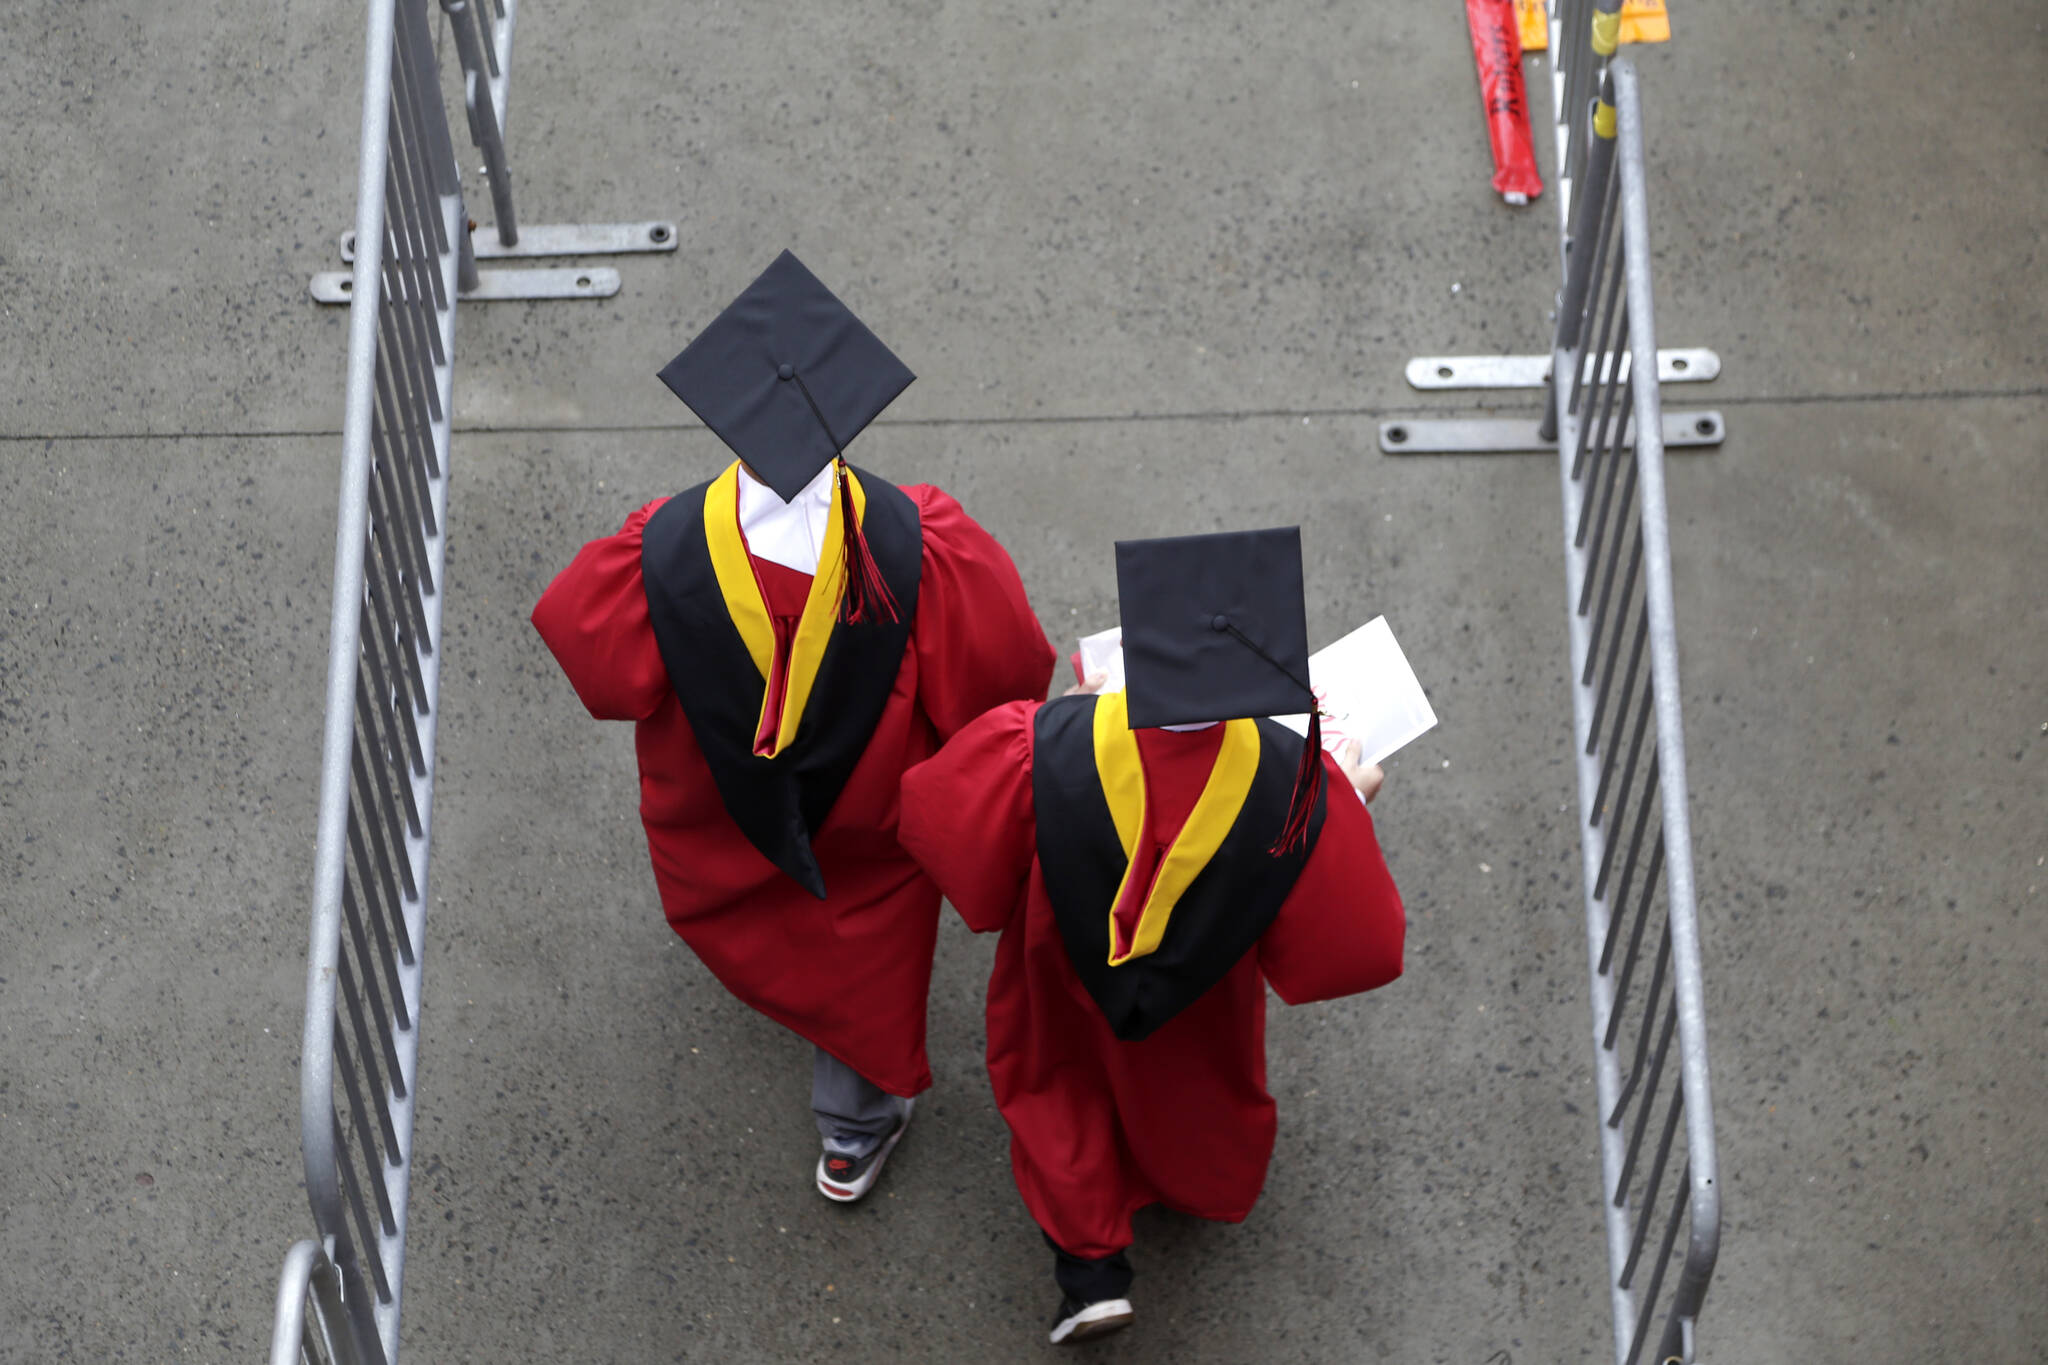 New graduates walk into the High Point Solutions Stadium before the start of the Rutgers University graduation ceremony in Piscataway Township, N.J., on May 13, 2018. The Supreme Court is about to hear arguments over President Joe Biden’s student debt relief plan. It’s a plan that impacts millions of borrowers who could see their loans wiped away or reduced. (AP Photo / Seth Wenig)